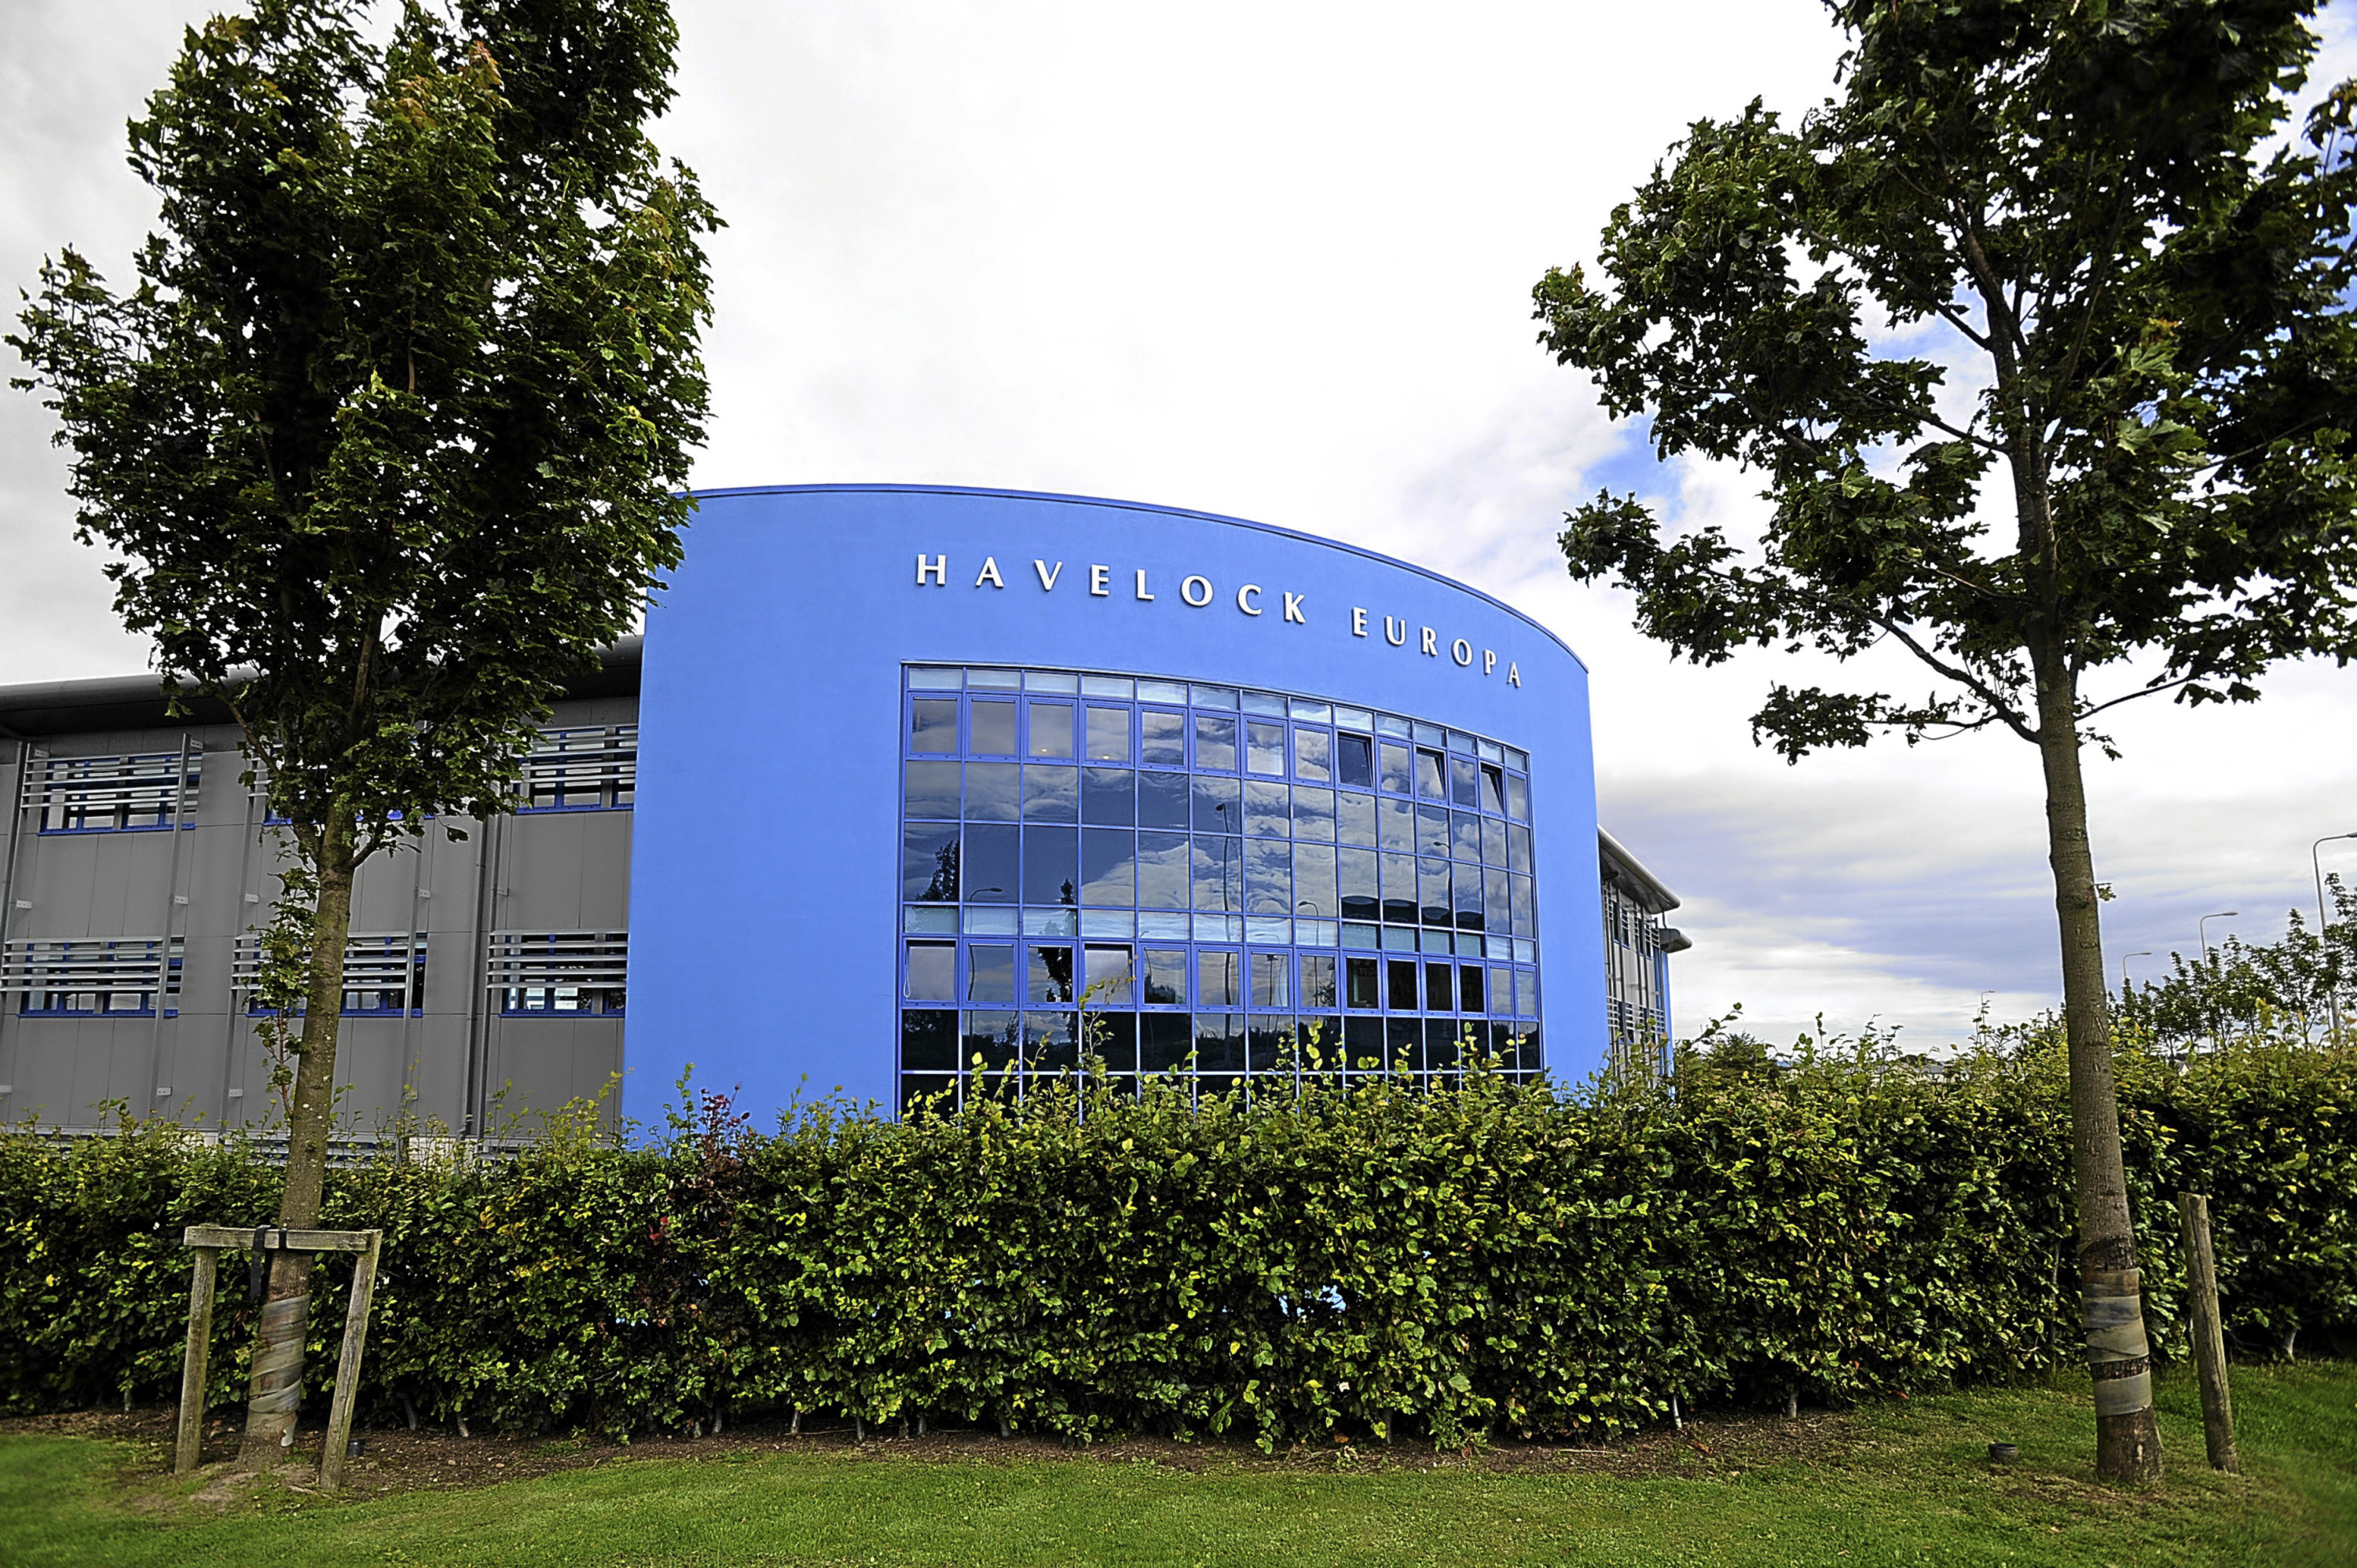 The former Havelock building at John Smith Business Park.